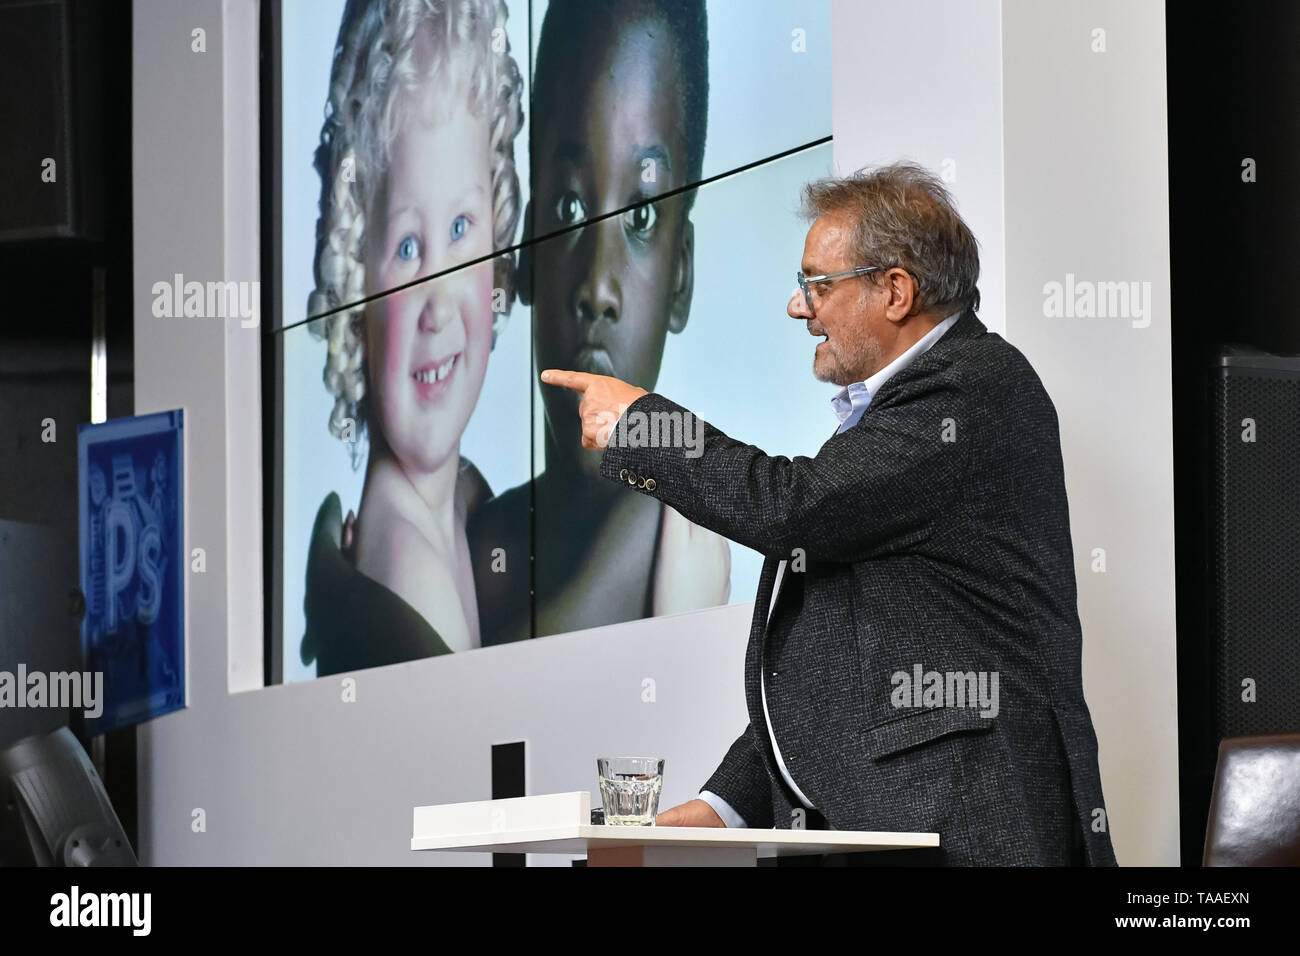 MOSCOW, RUSSIA - APRIL 24, 2018: Master class of Oliviero Toscani, an Italian photographer, best-known worldwide for designing controversial advertisi Stock Photo